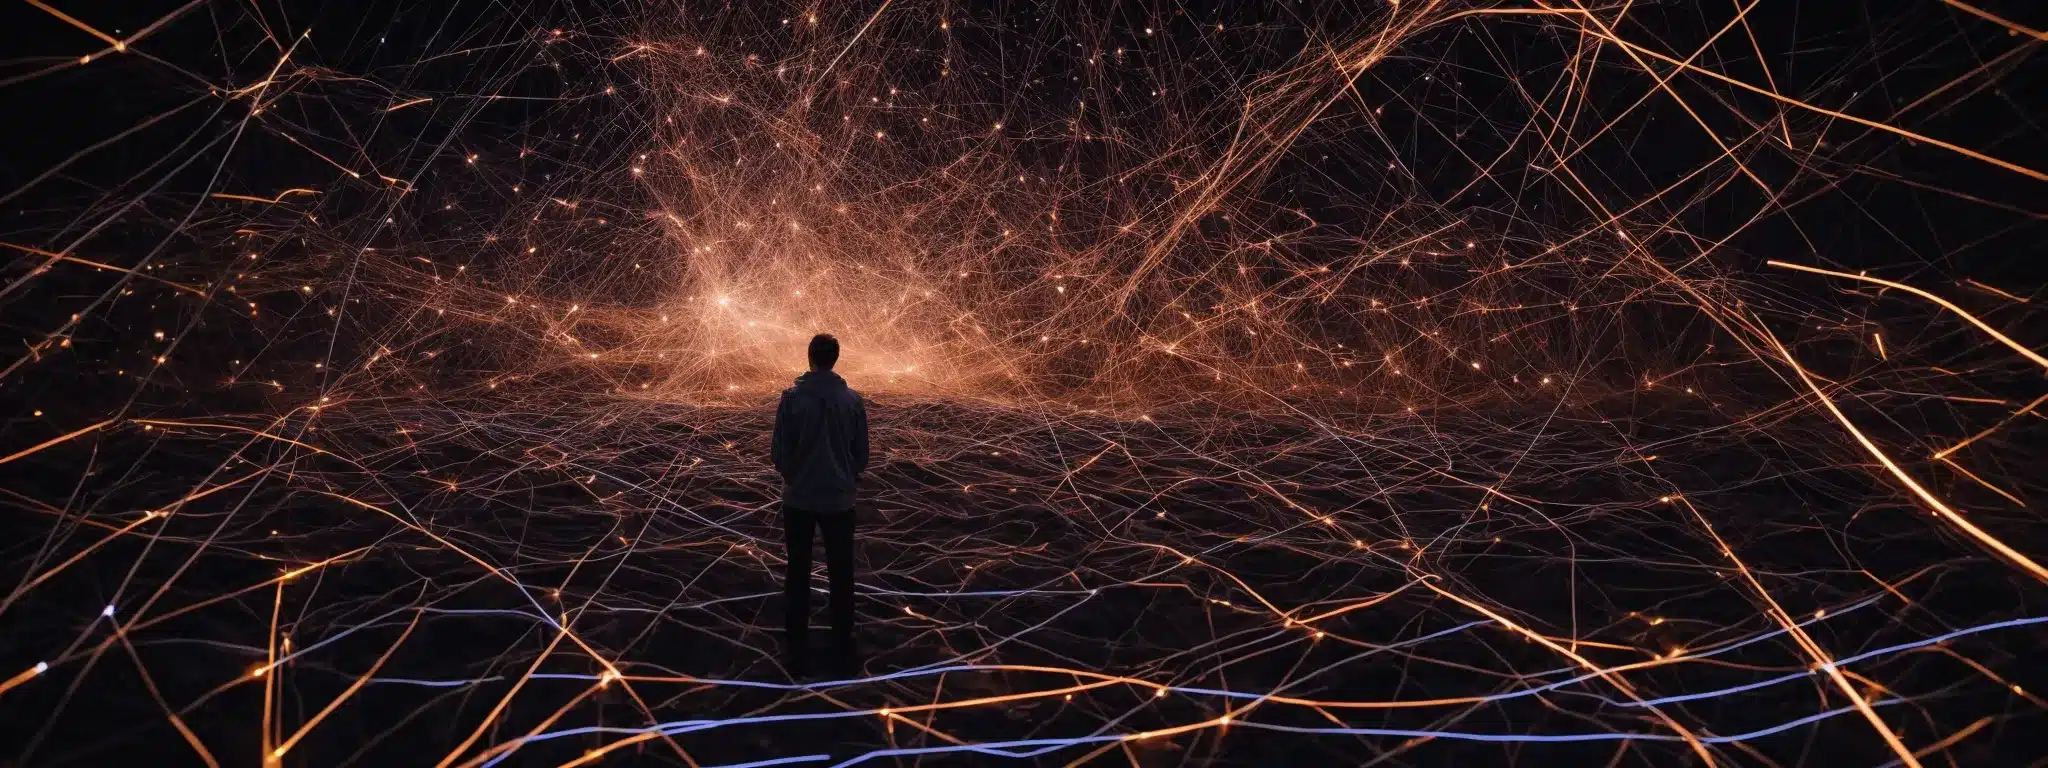 A Person Stands Amidst A Network Of Intertwined Glowing Lines Symbolizing The Interconnected Digital Marketing Channels.